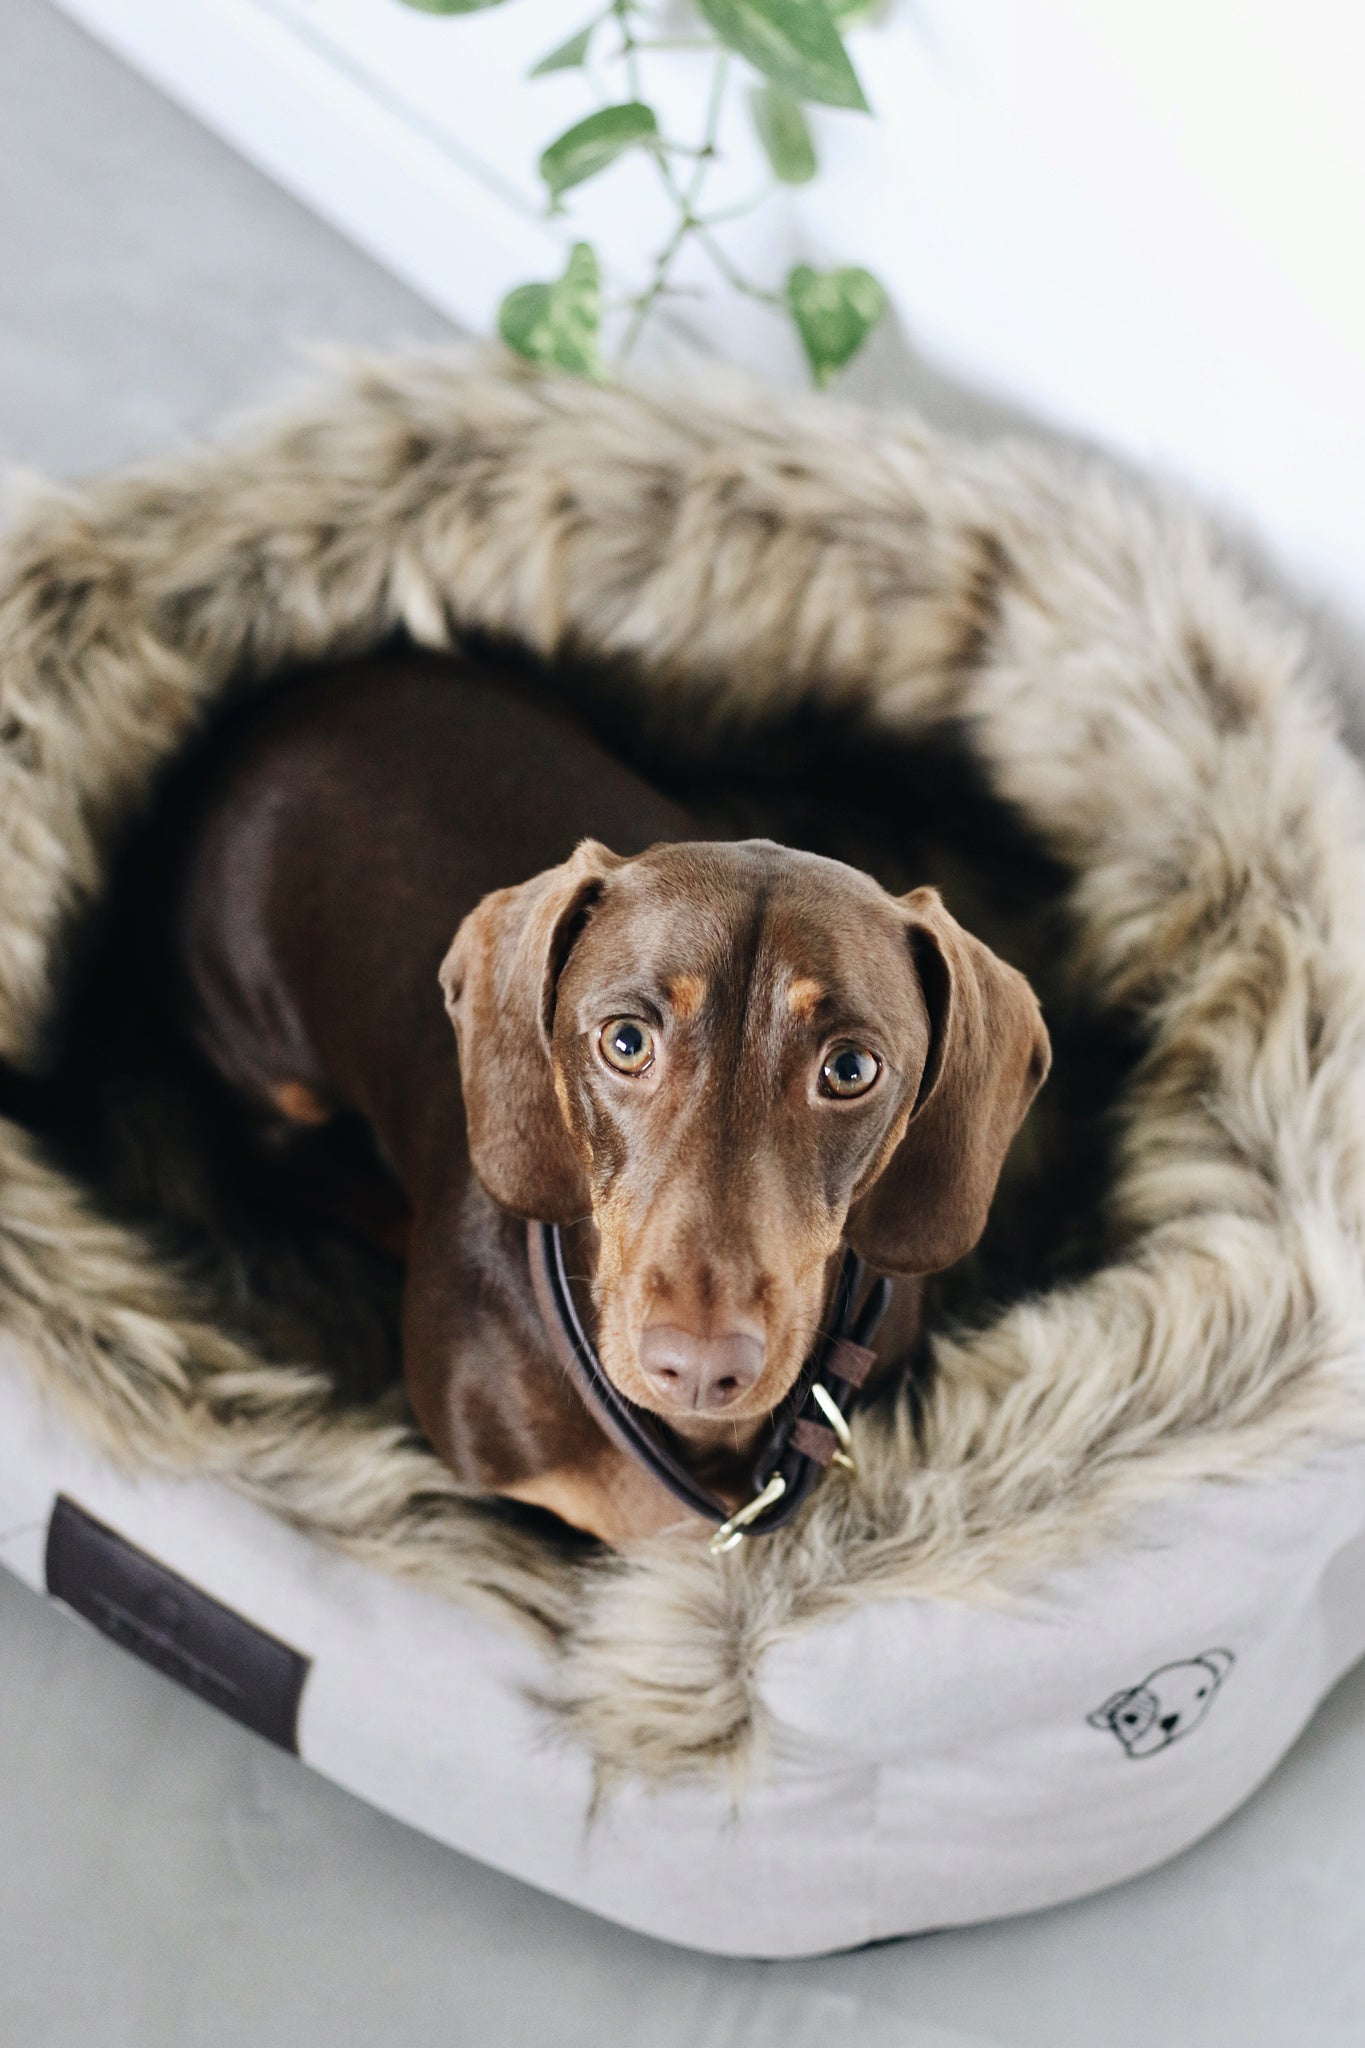 The Kentucky Dog Bed Cave will make your dog feel very cozy and spoiled. Made of comfortable and super soft racoon faux fur on the inside, this bed will ensure your dog feels snug when curling up for a snooze. 